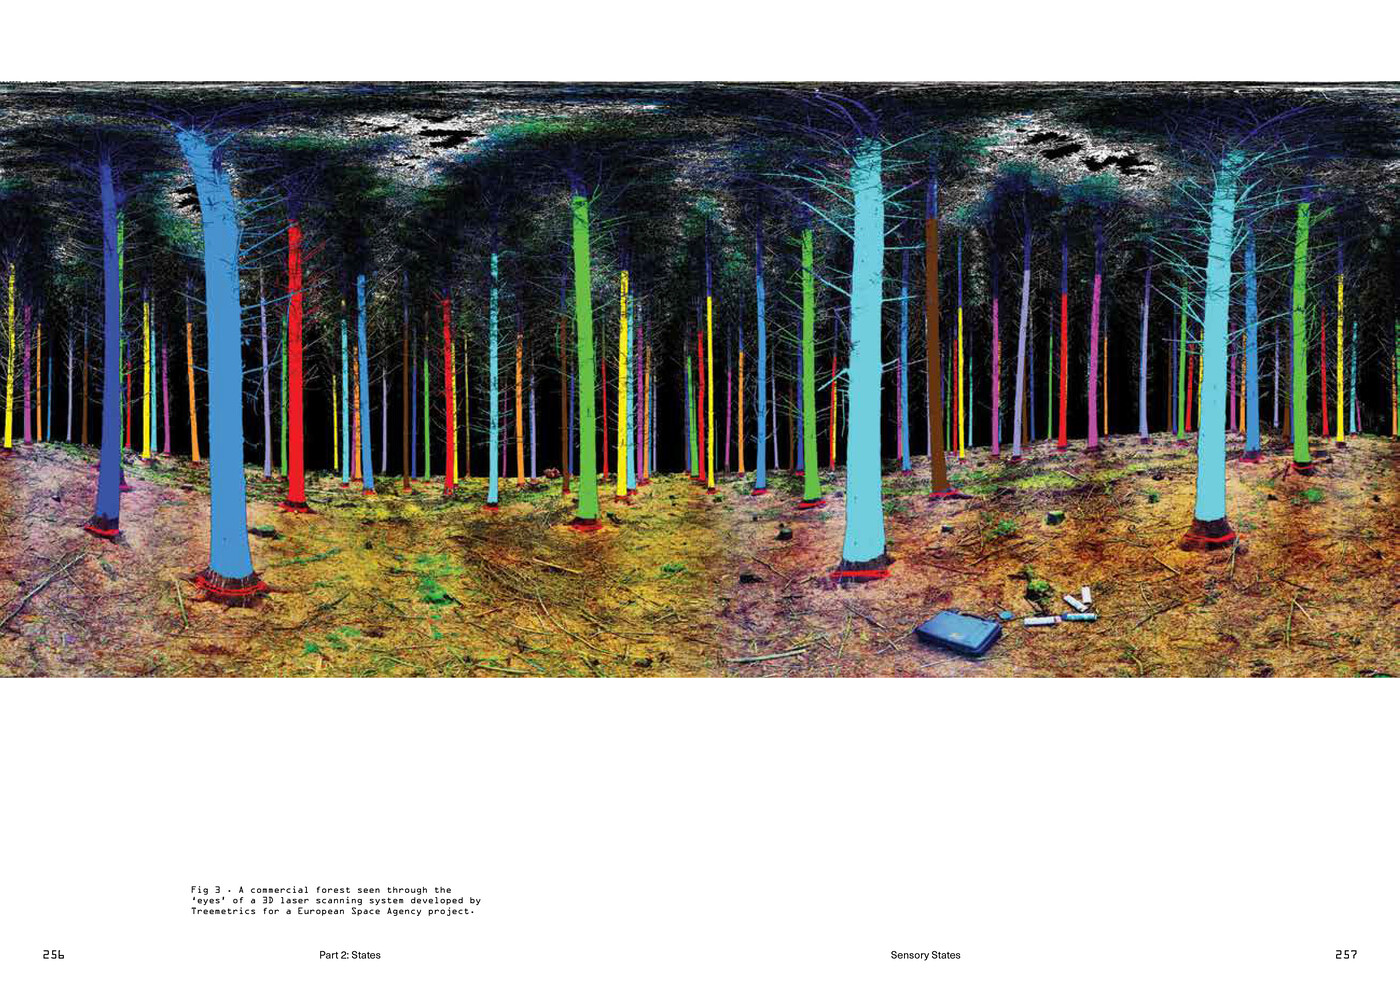 ANNEX, States of Entanglement: Data In The Irish Landscape, ACTAR 2021. Photograph of a 3D laser scan of a forest developed by treemetrics. From the essay \